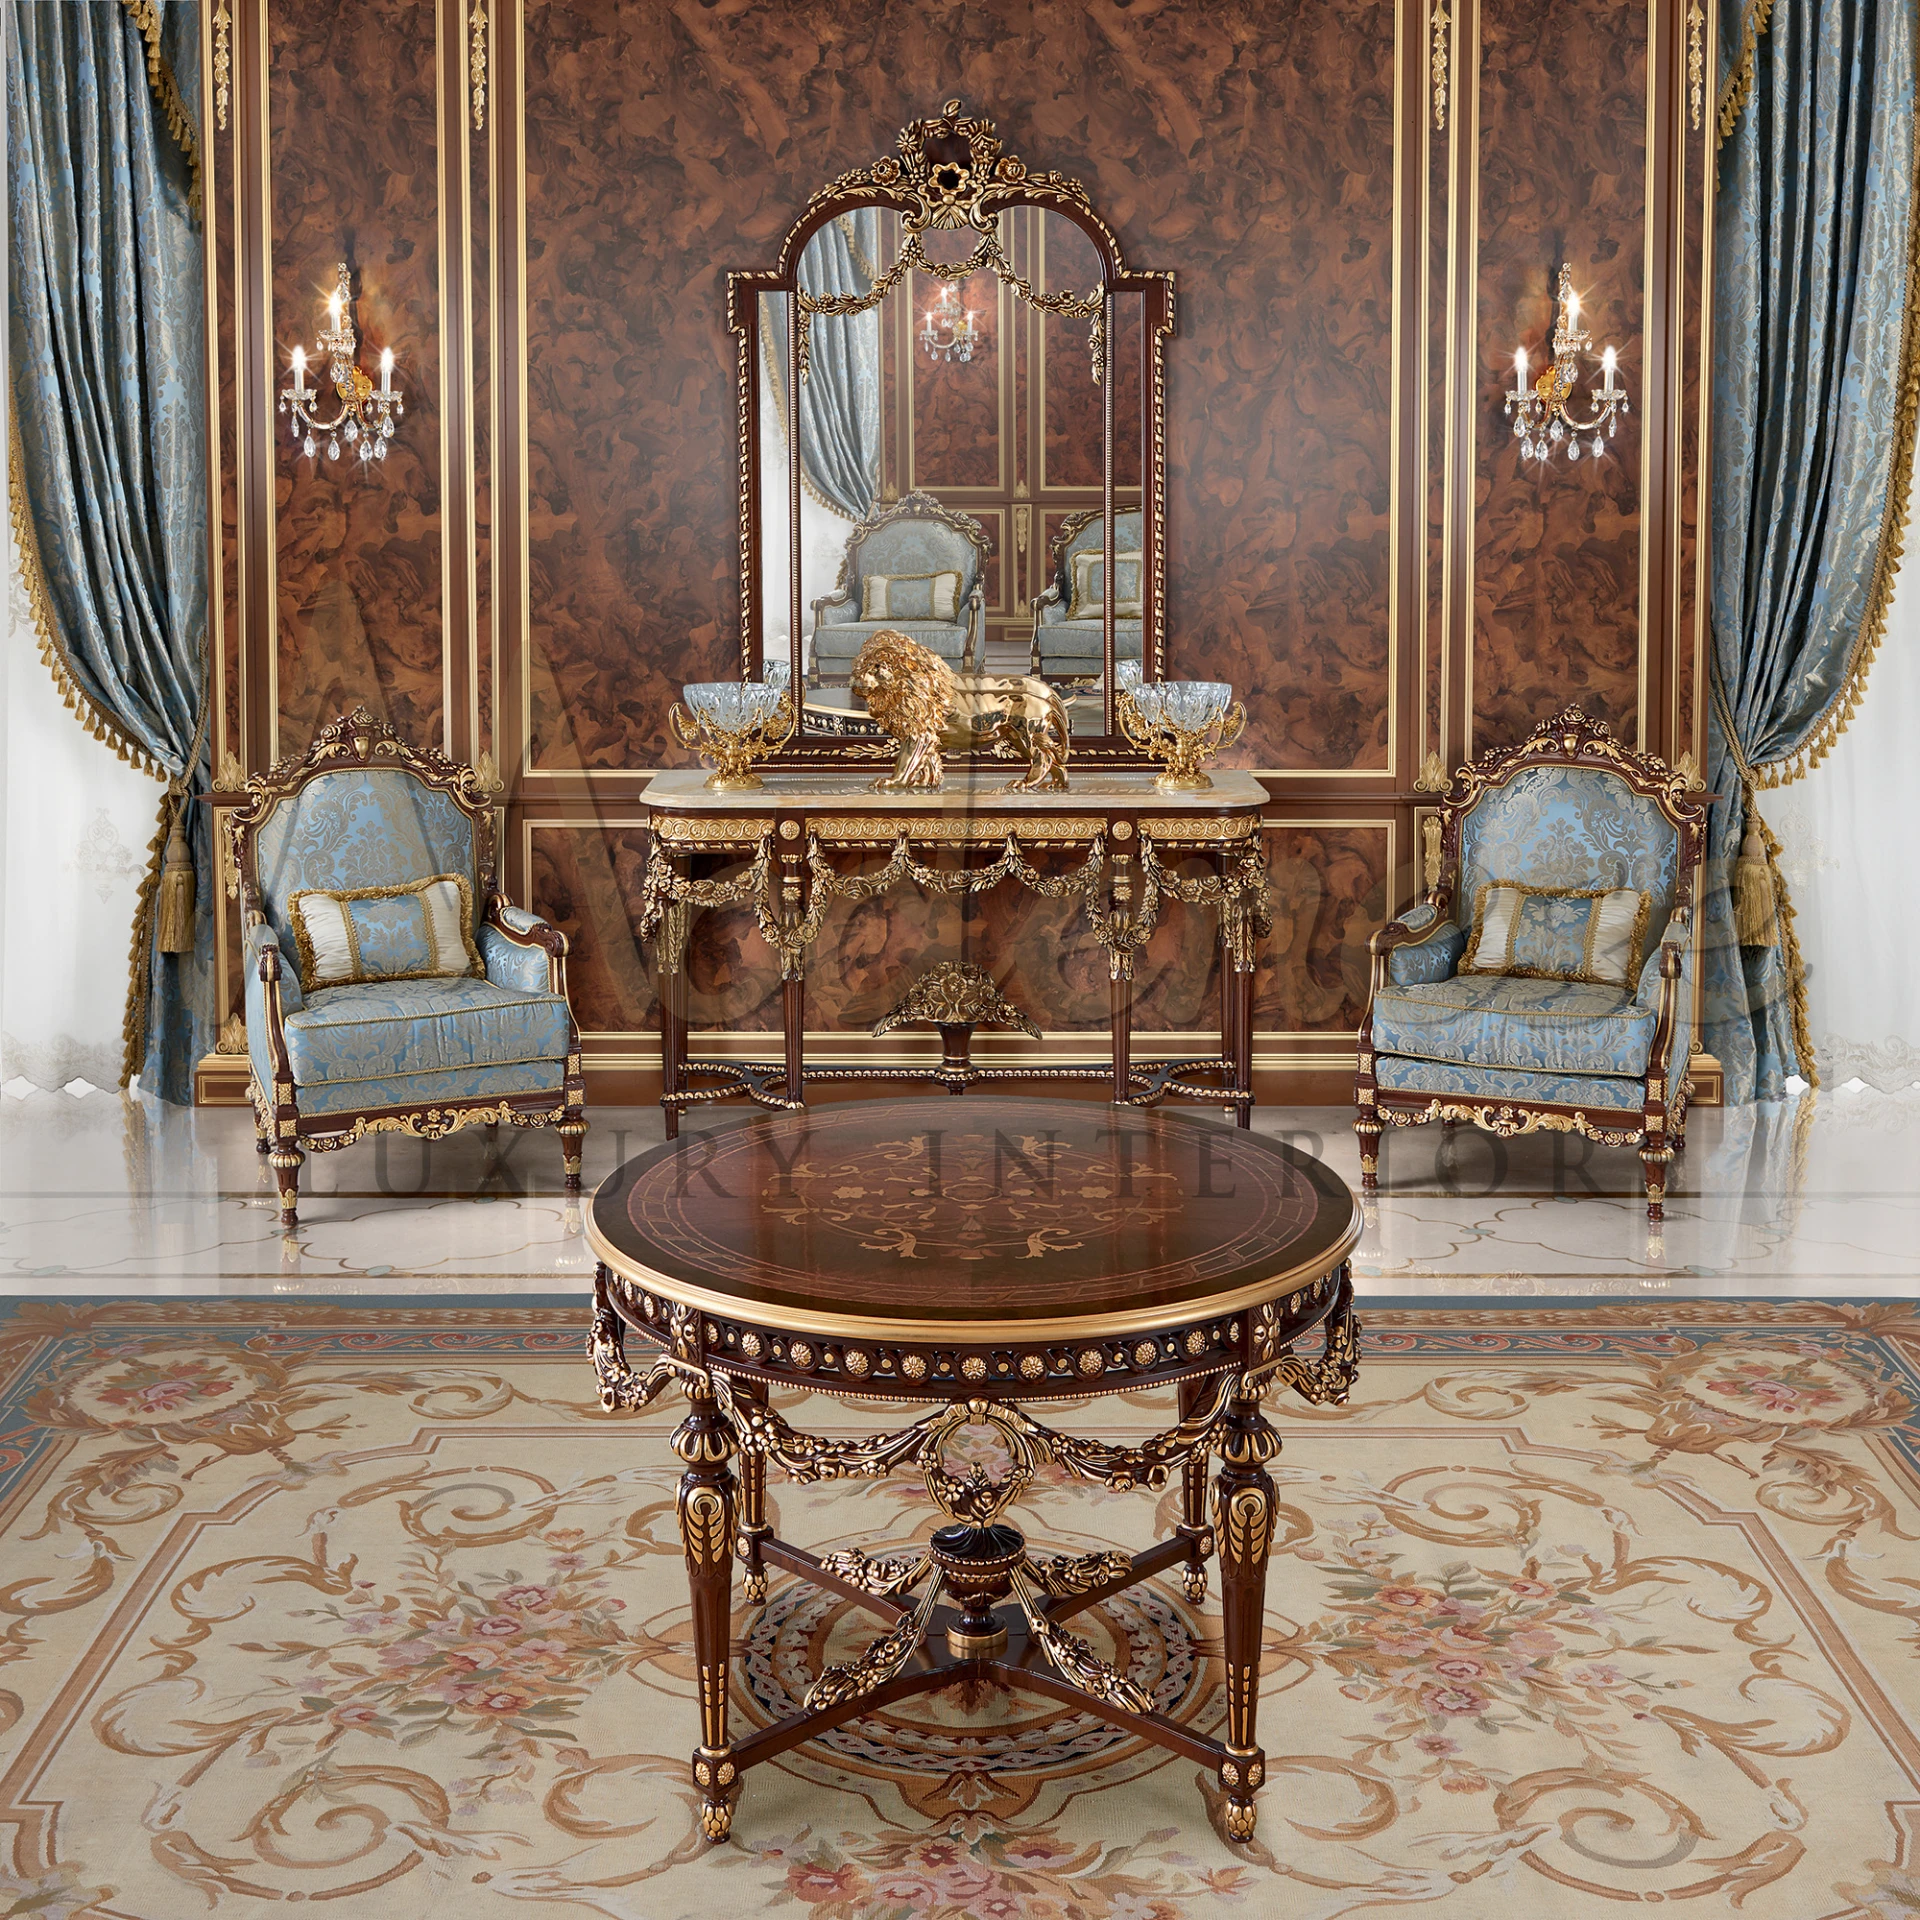  Luxurious Italian-designed Classic Figured Central Table, featuring exquisite inlay decoration for sophisticated home decor.
